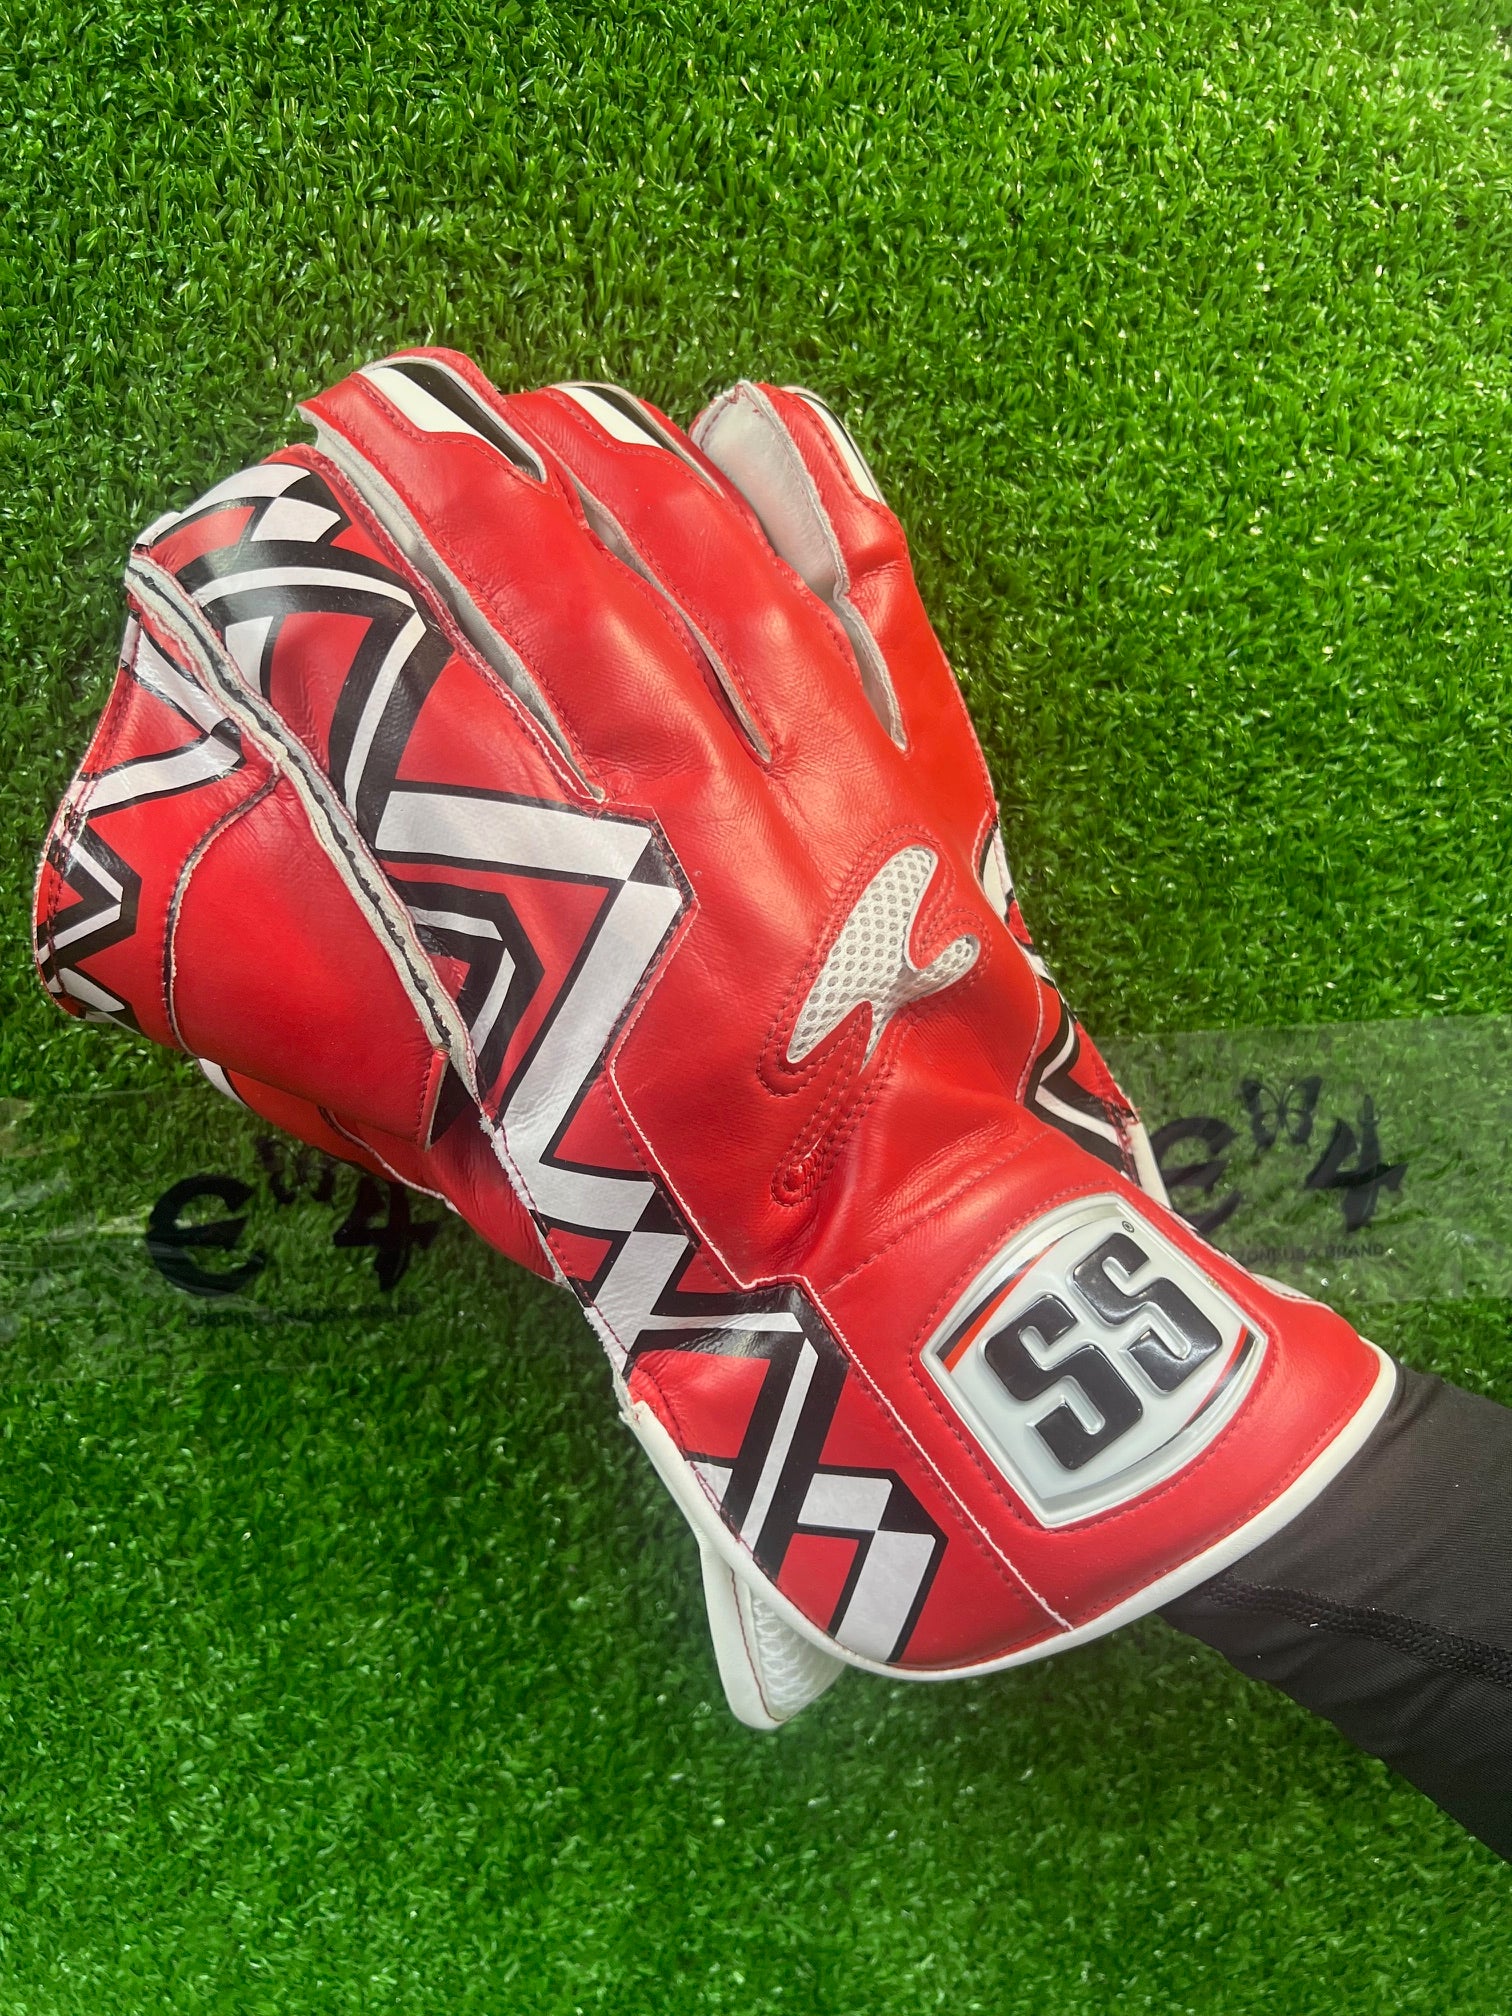 SS Match Wicket Keeping Gloves - 2024